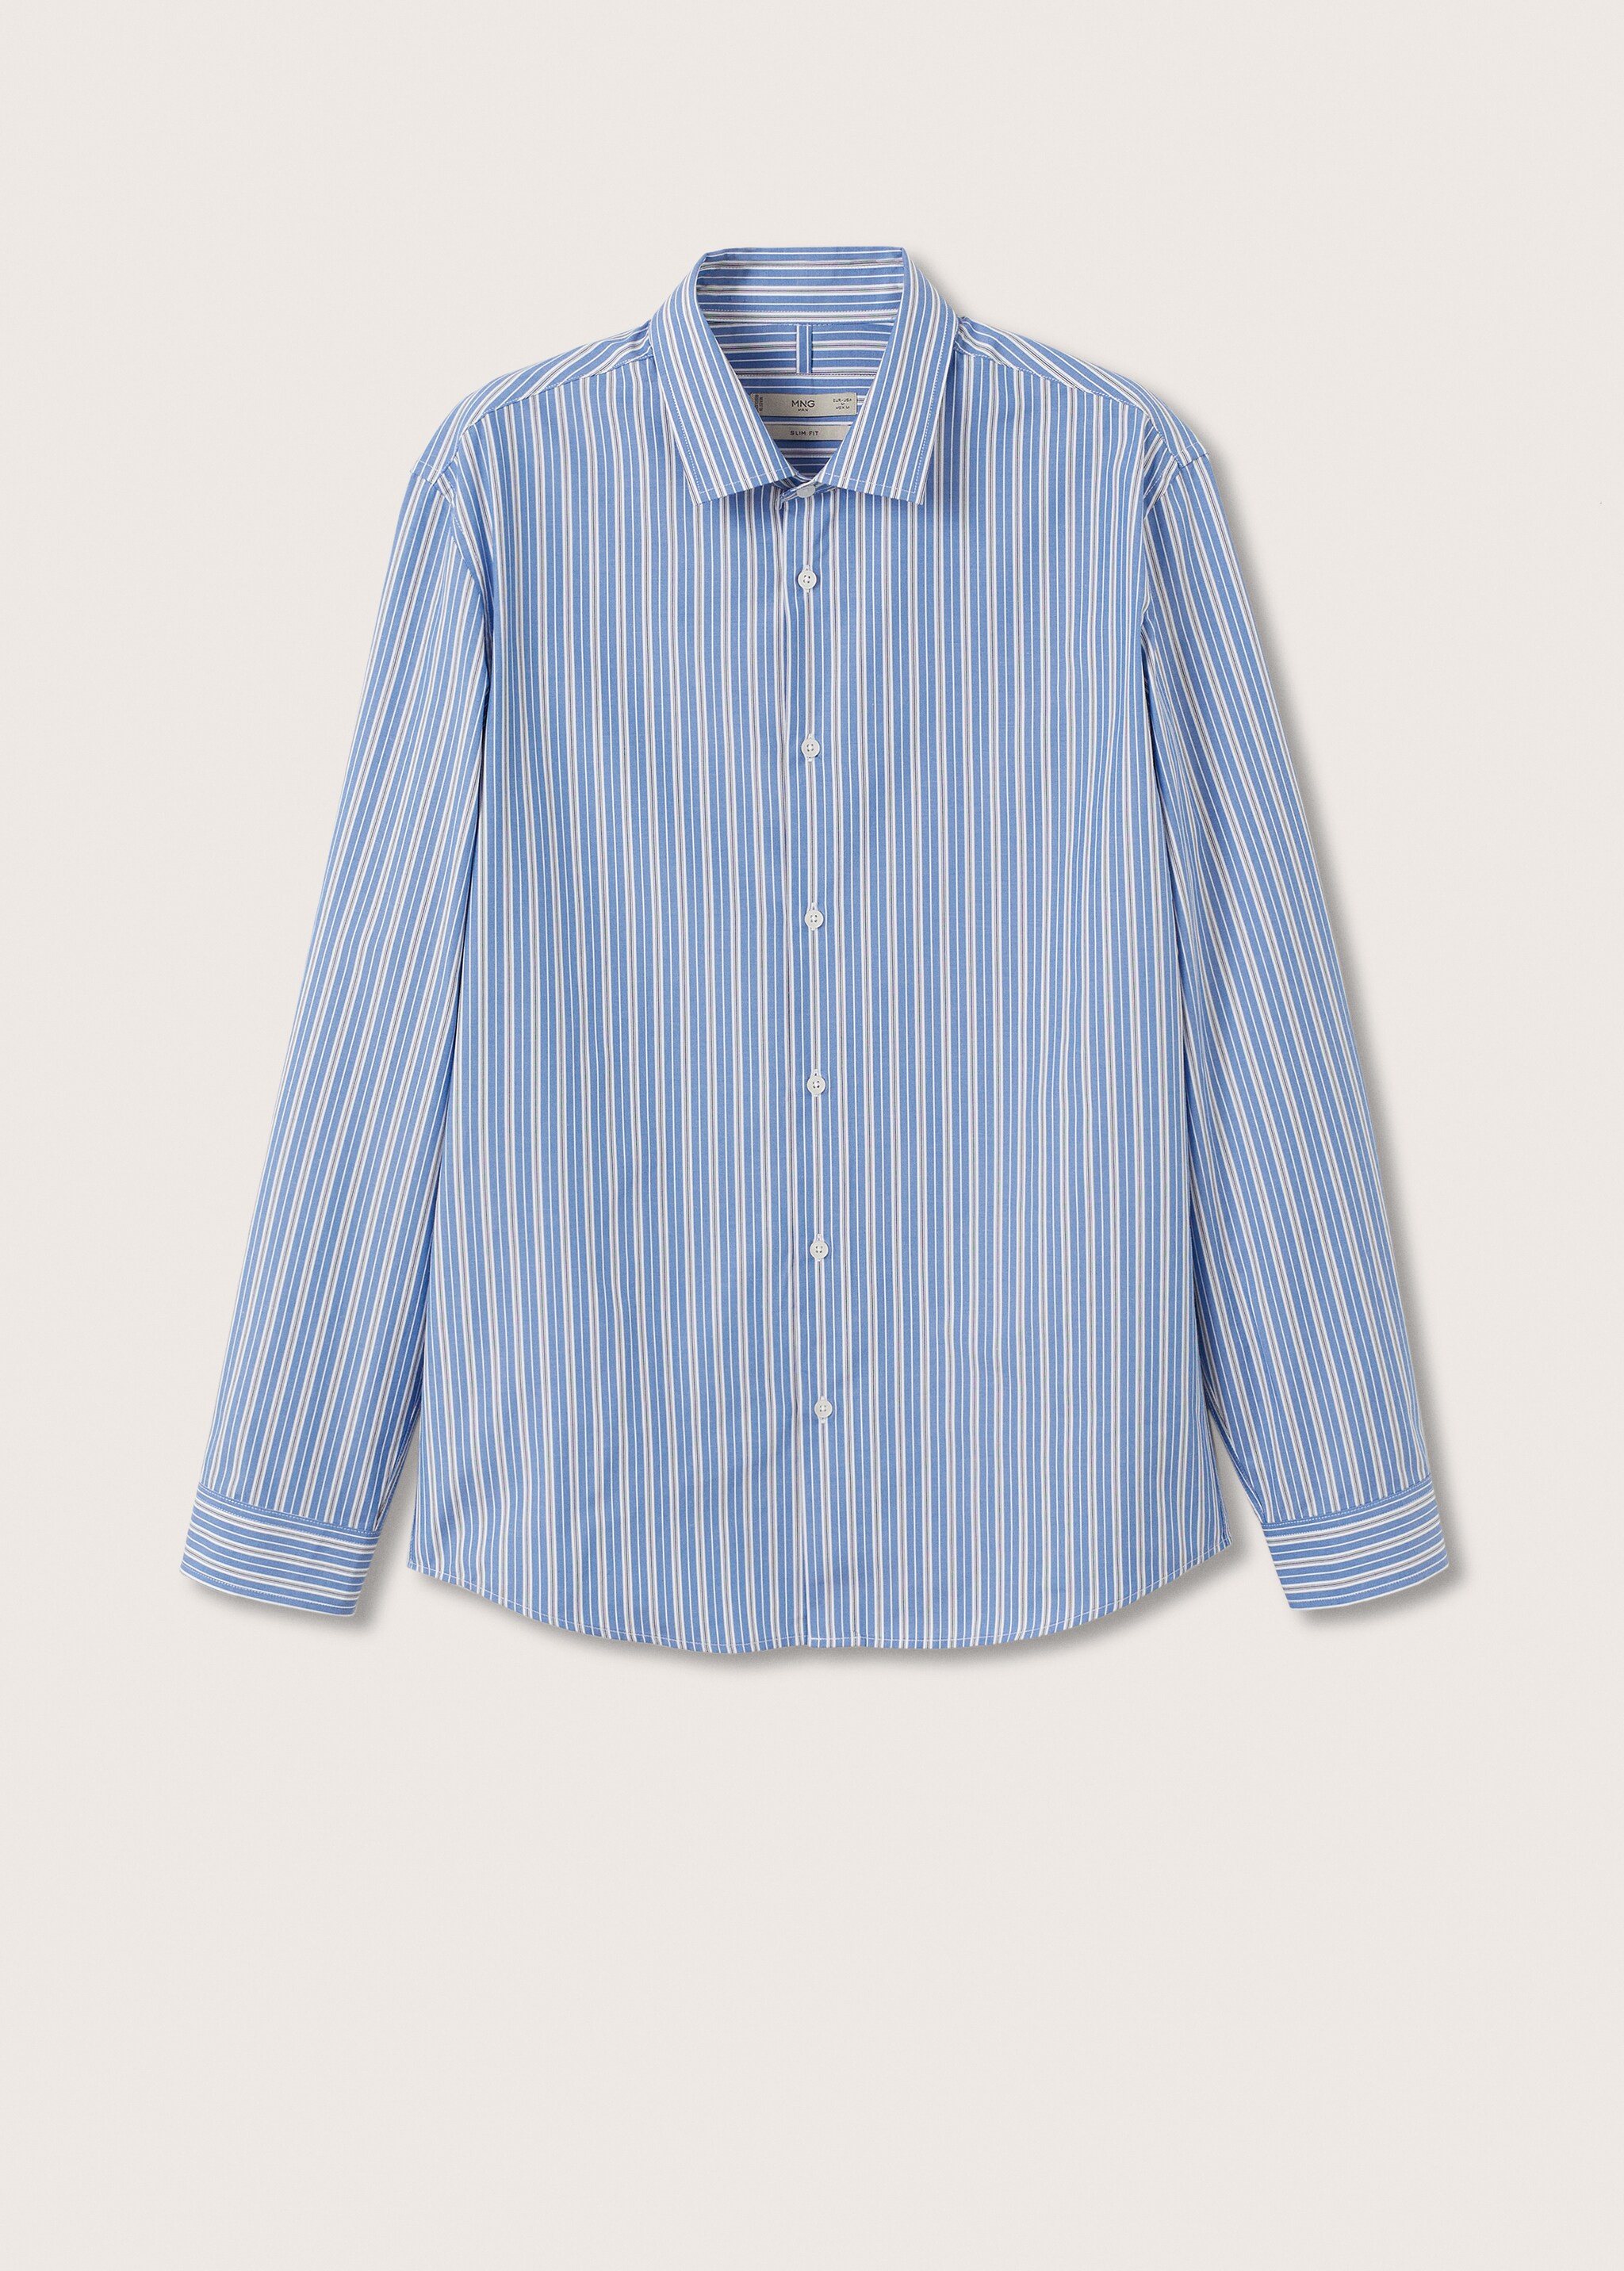 Thermoregulating striped shirt - Article without model